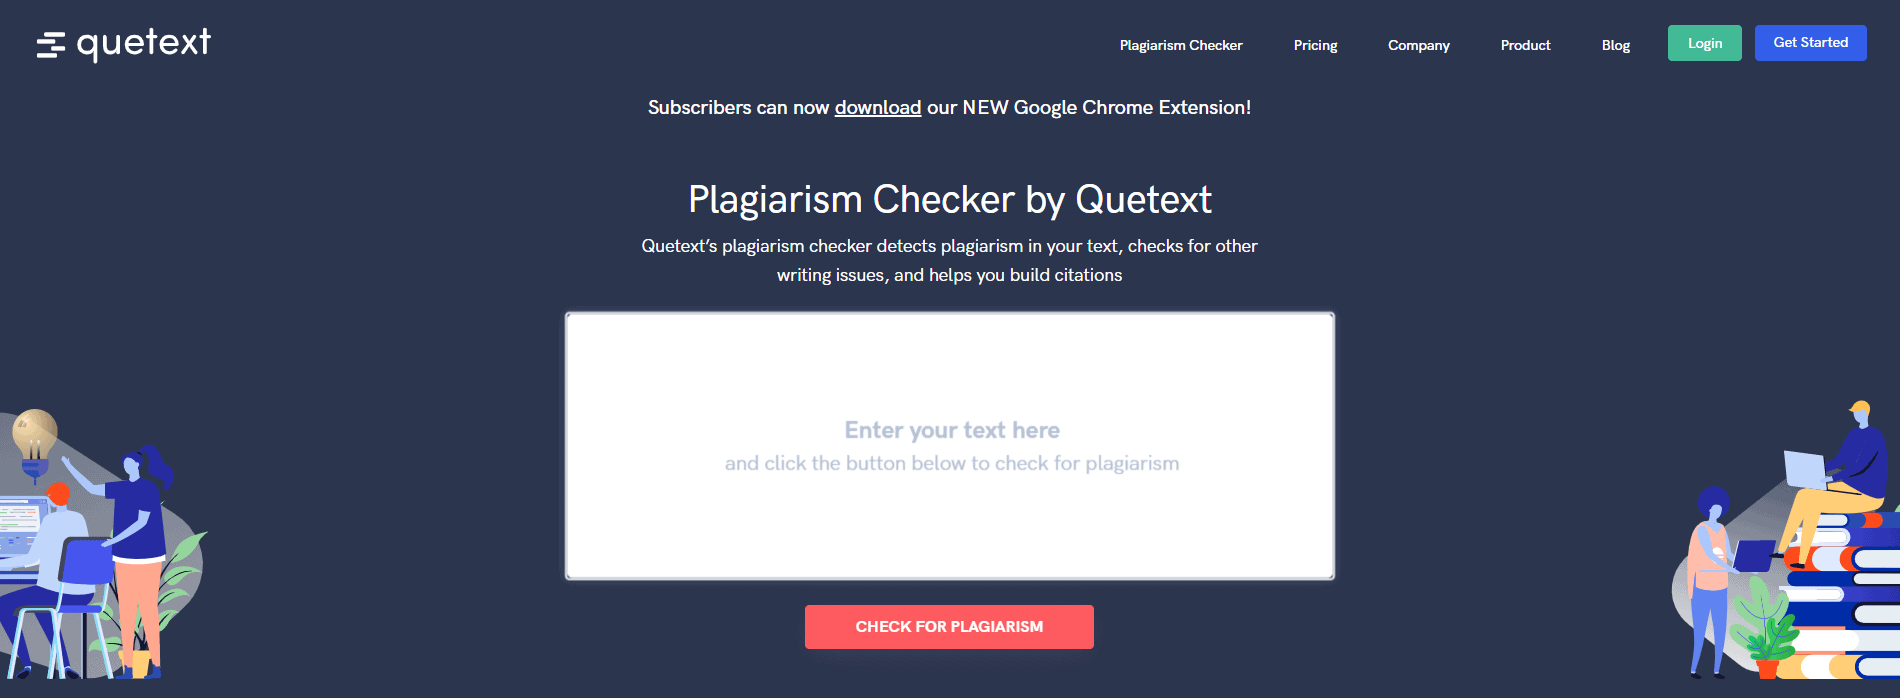 Quetext Plagiarism Checker - Best Free Plagiarism Checkers